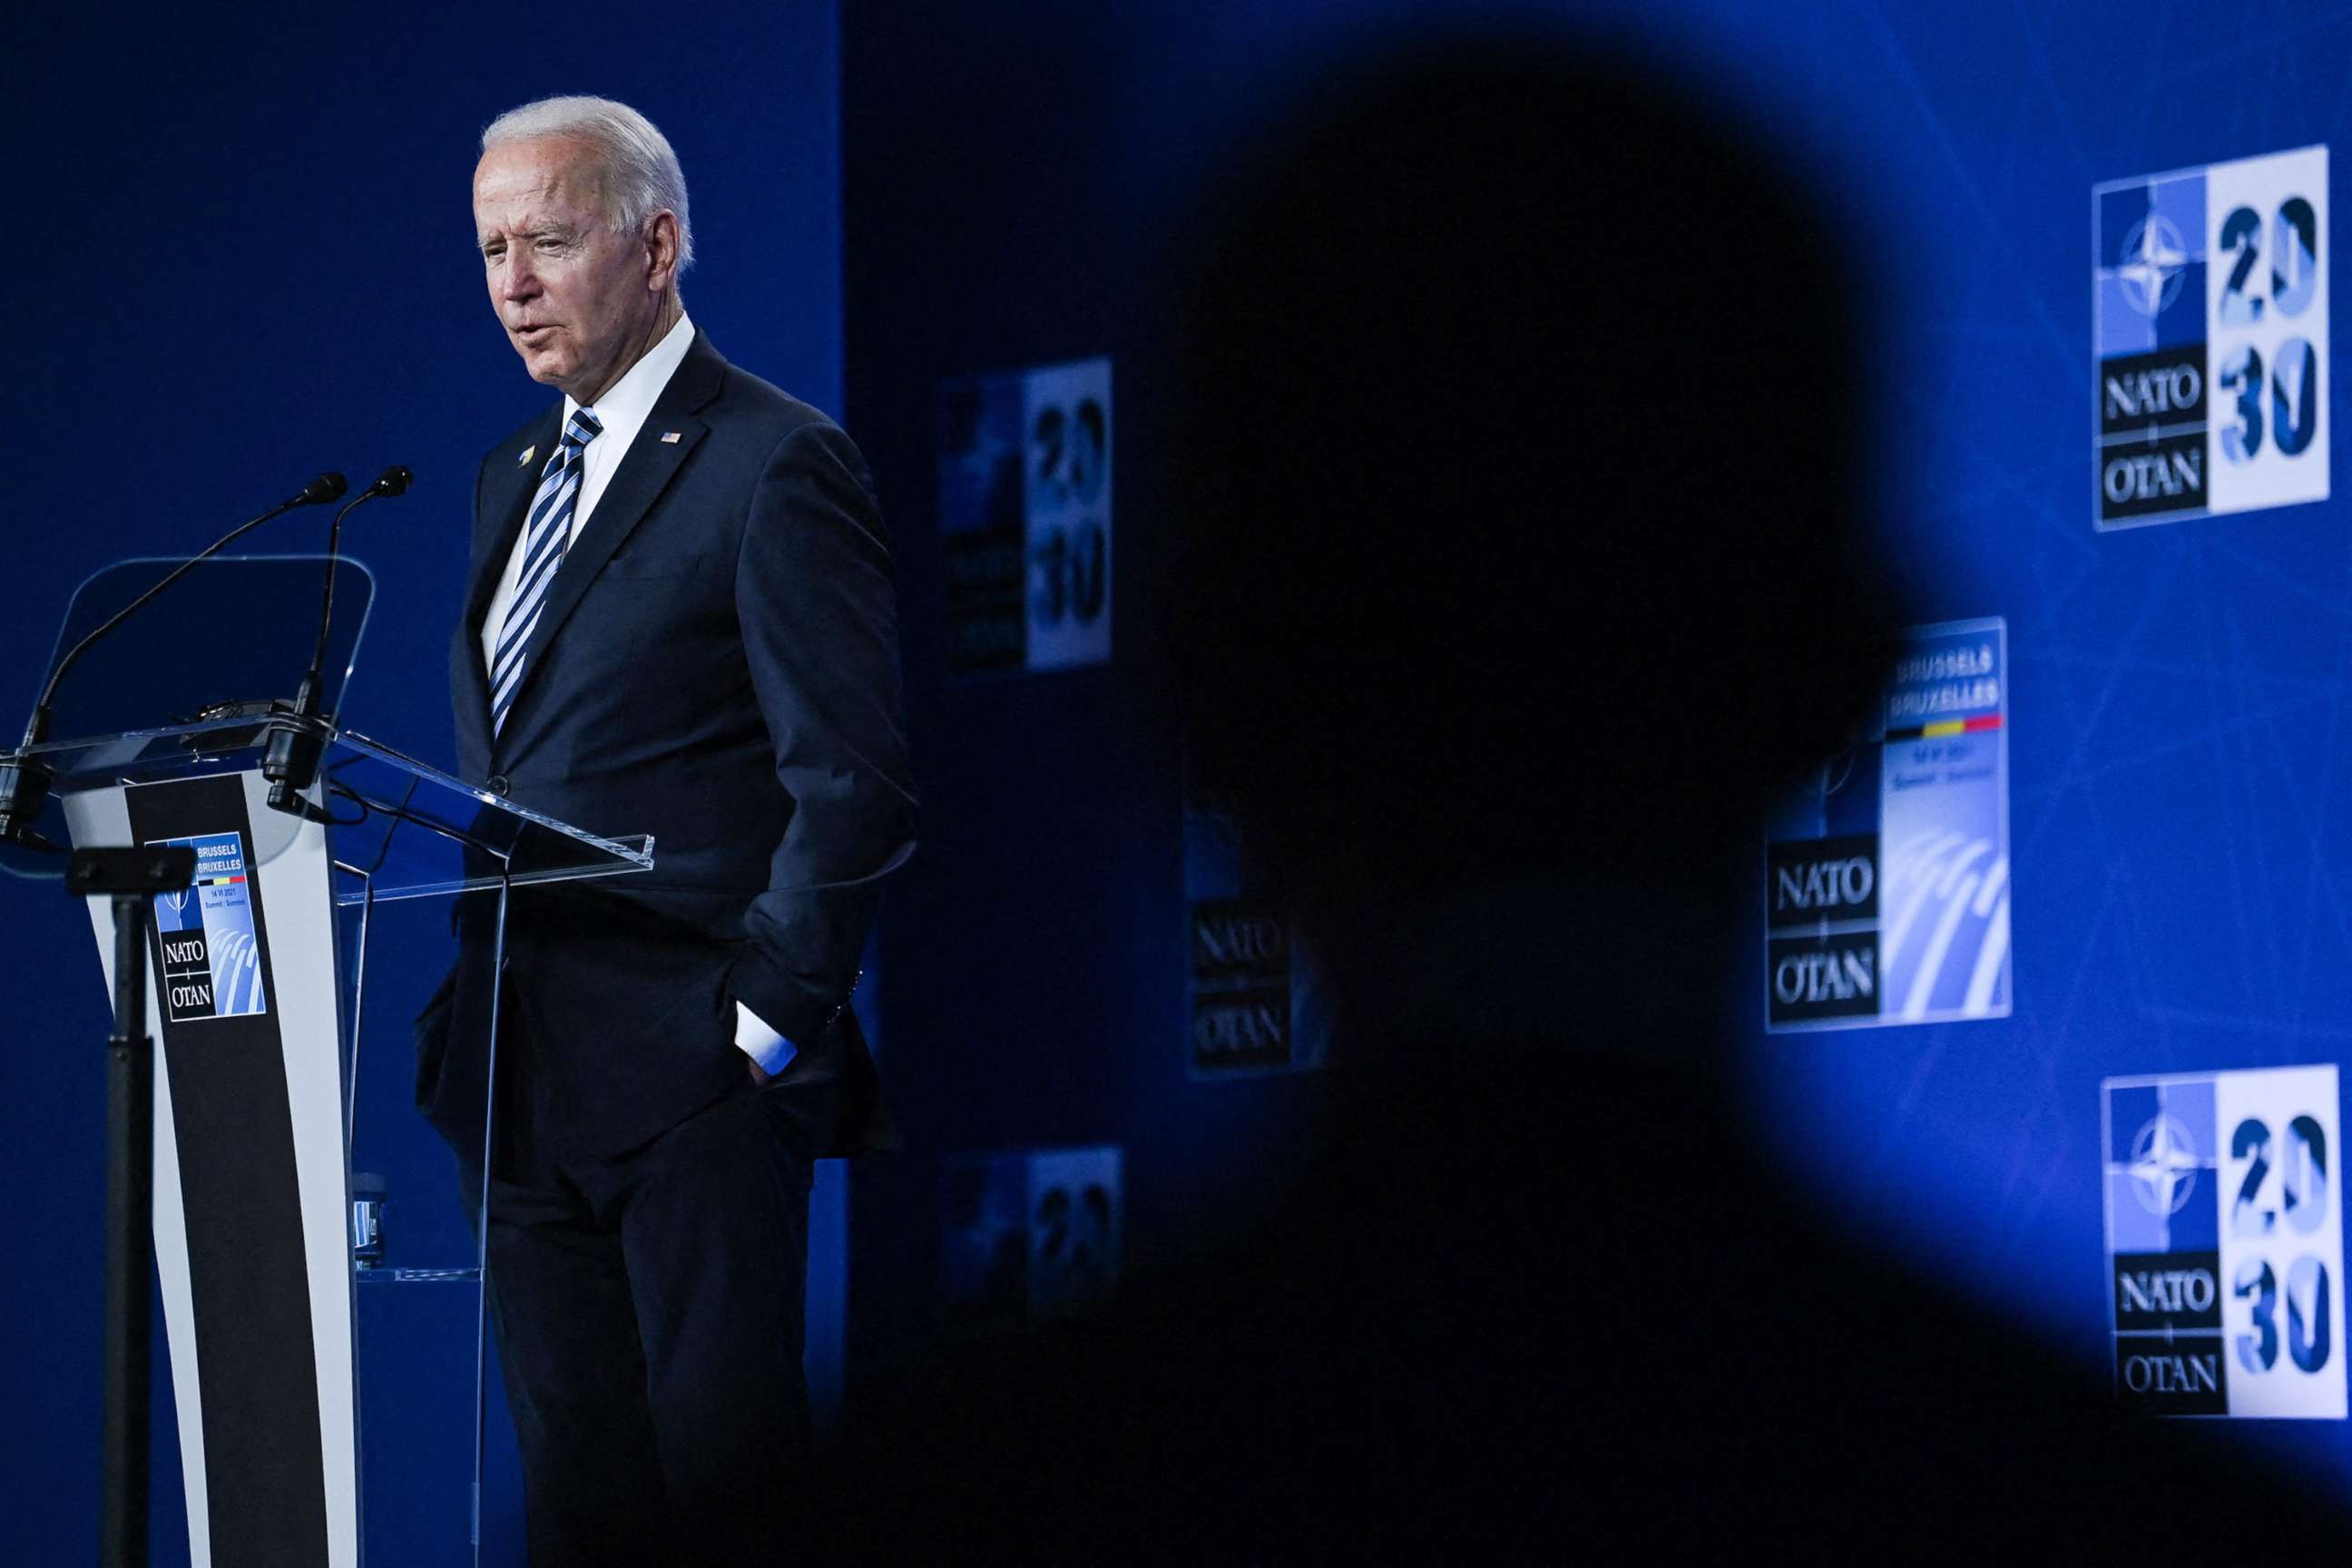 PHOTO: President Joe Biden speaks during a press conference after the NATO summit at the North Atlantic Treaty Organization (NATO) headquarters in Brussels, June 14, 2021.